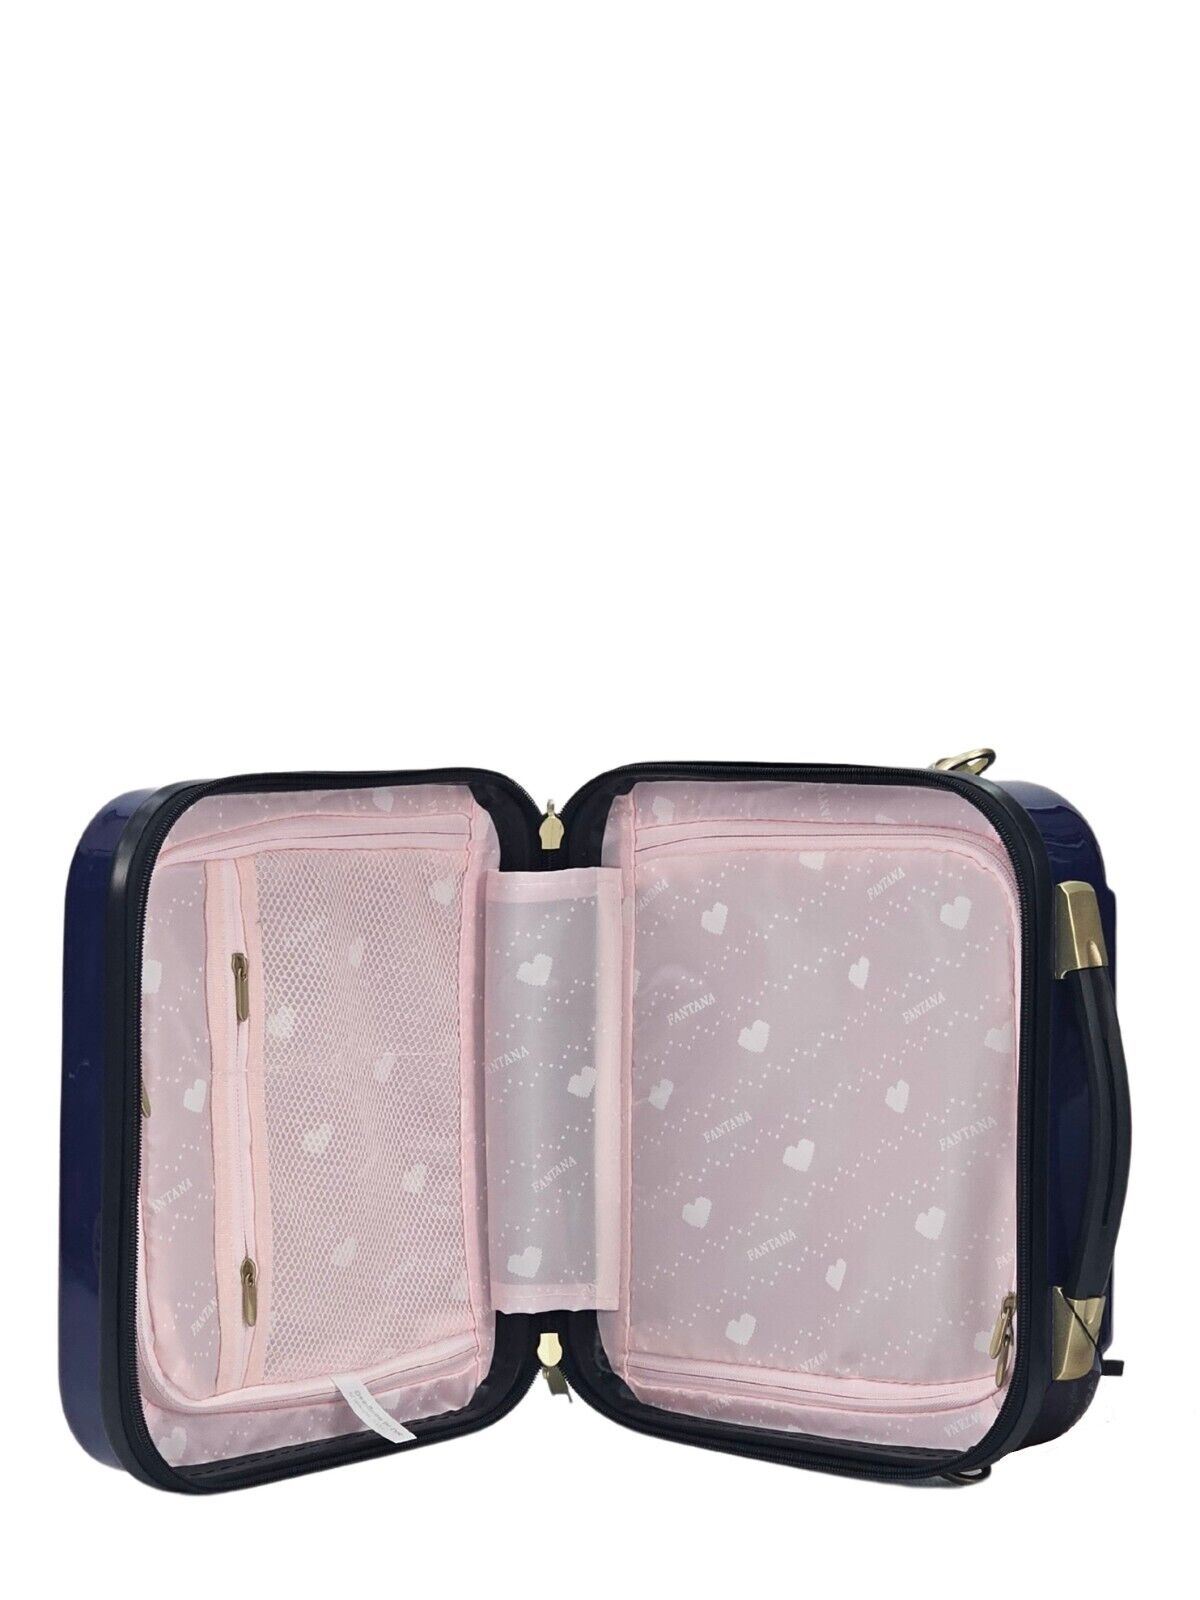 Butler Cosmetic Hard Shell Suitcase in Blue